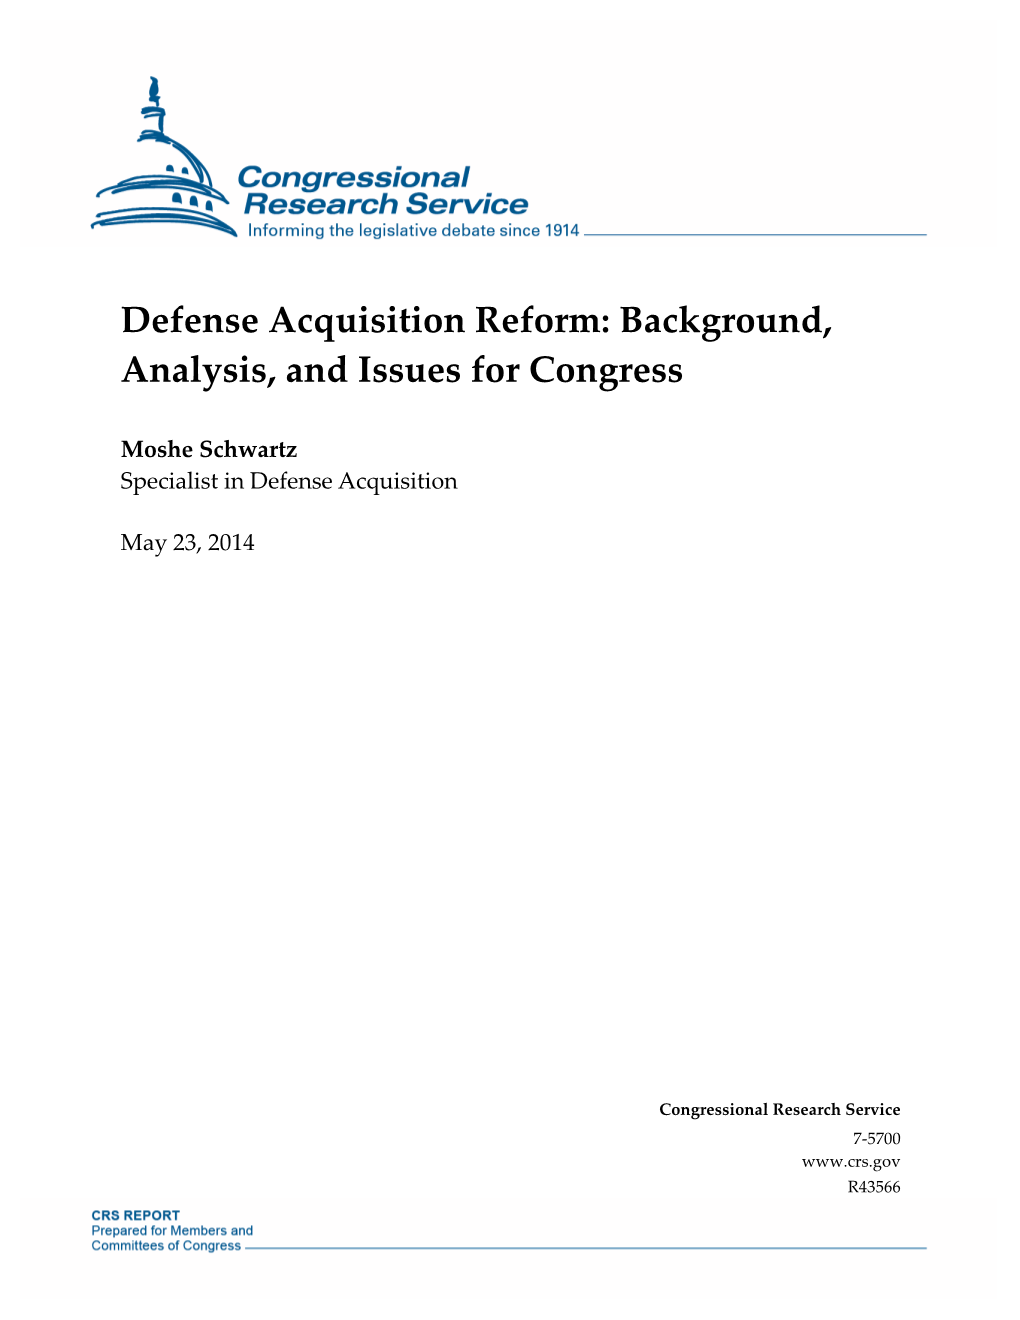 Defense Acquisition Reform: Background, Analysis, and Issues for Congress